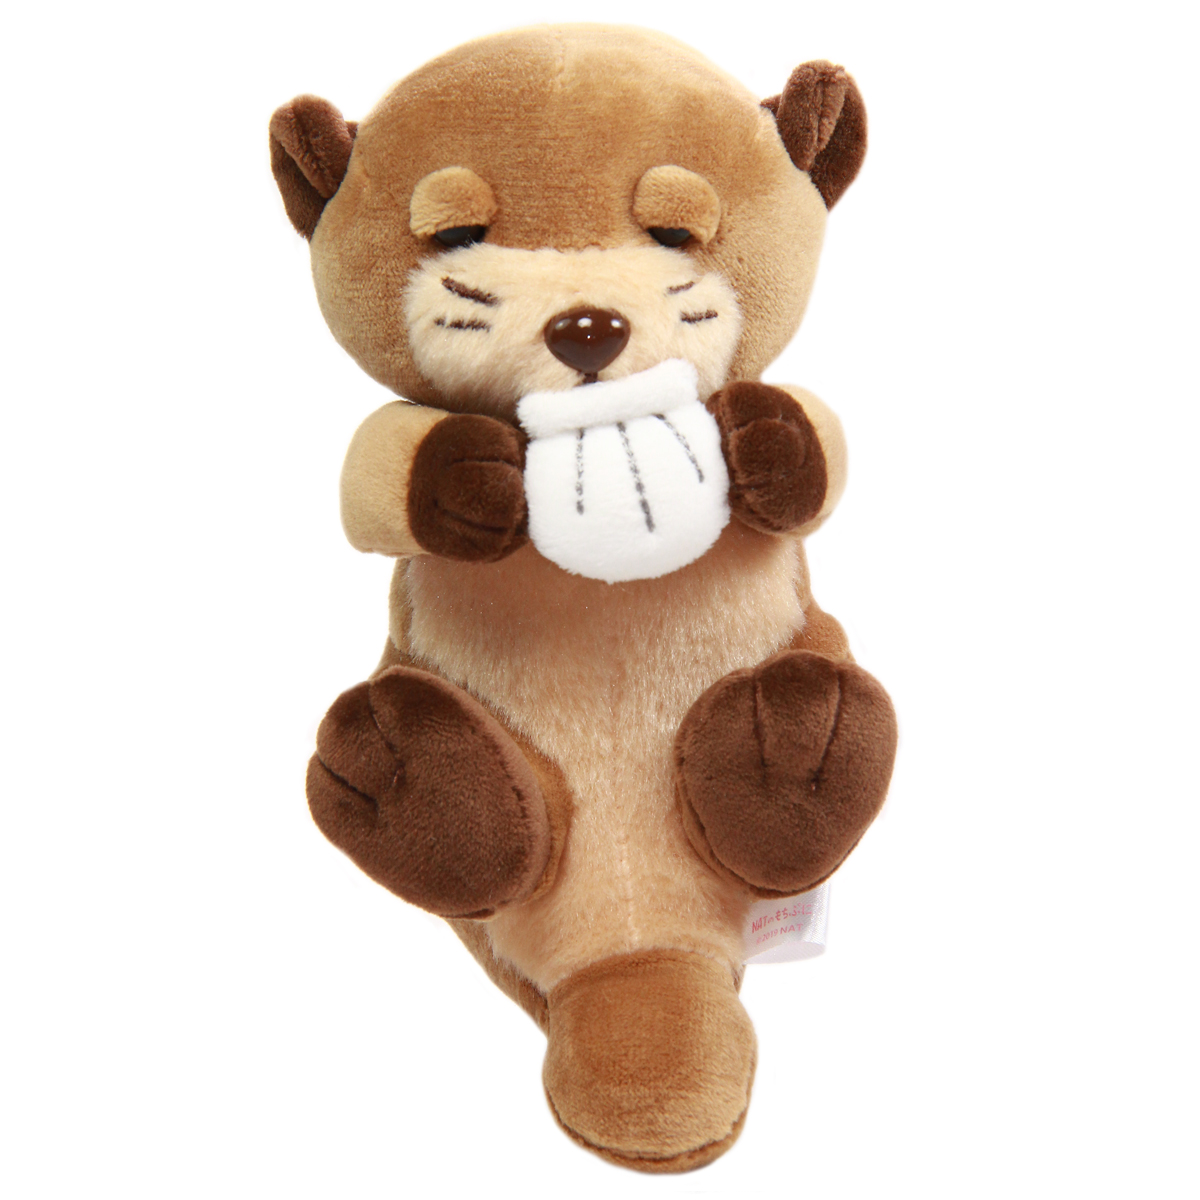 Mochi Puni Kawauso Collection Soft Sleepy Otter Plush Toy With Sea Shell Brown 7 Inches